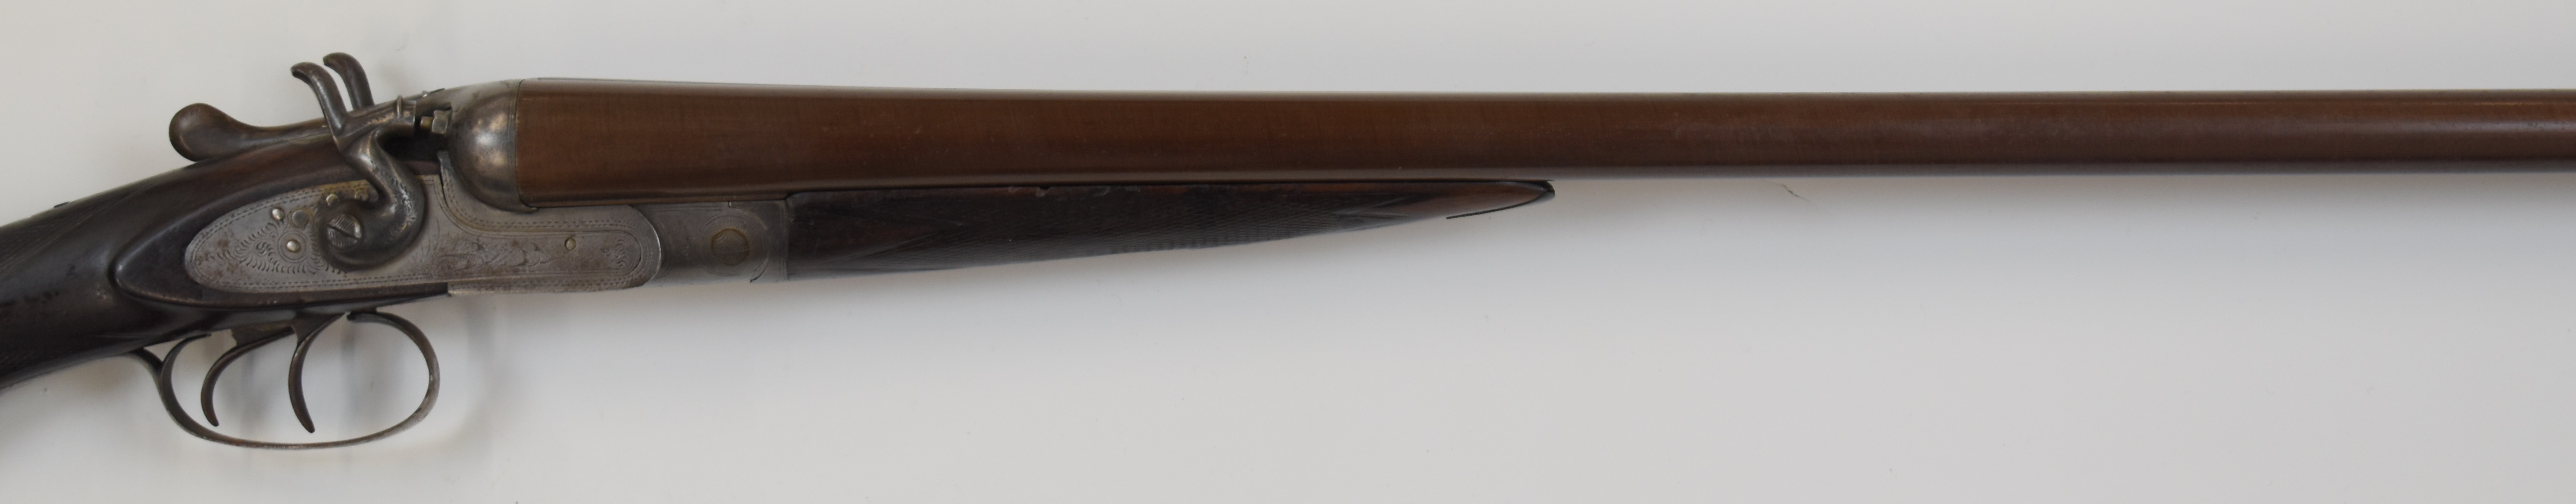 Skimin & Wood 12 bore side by side hammer action shotgun with engraved scenes of birds to the locks, - Image 12 of 12